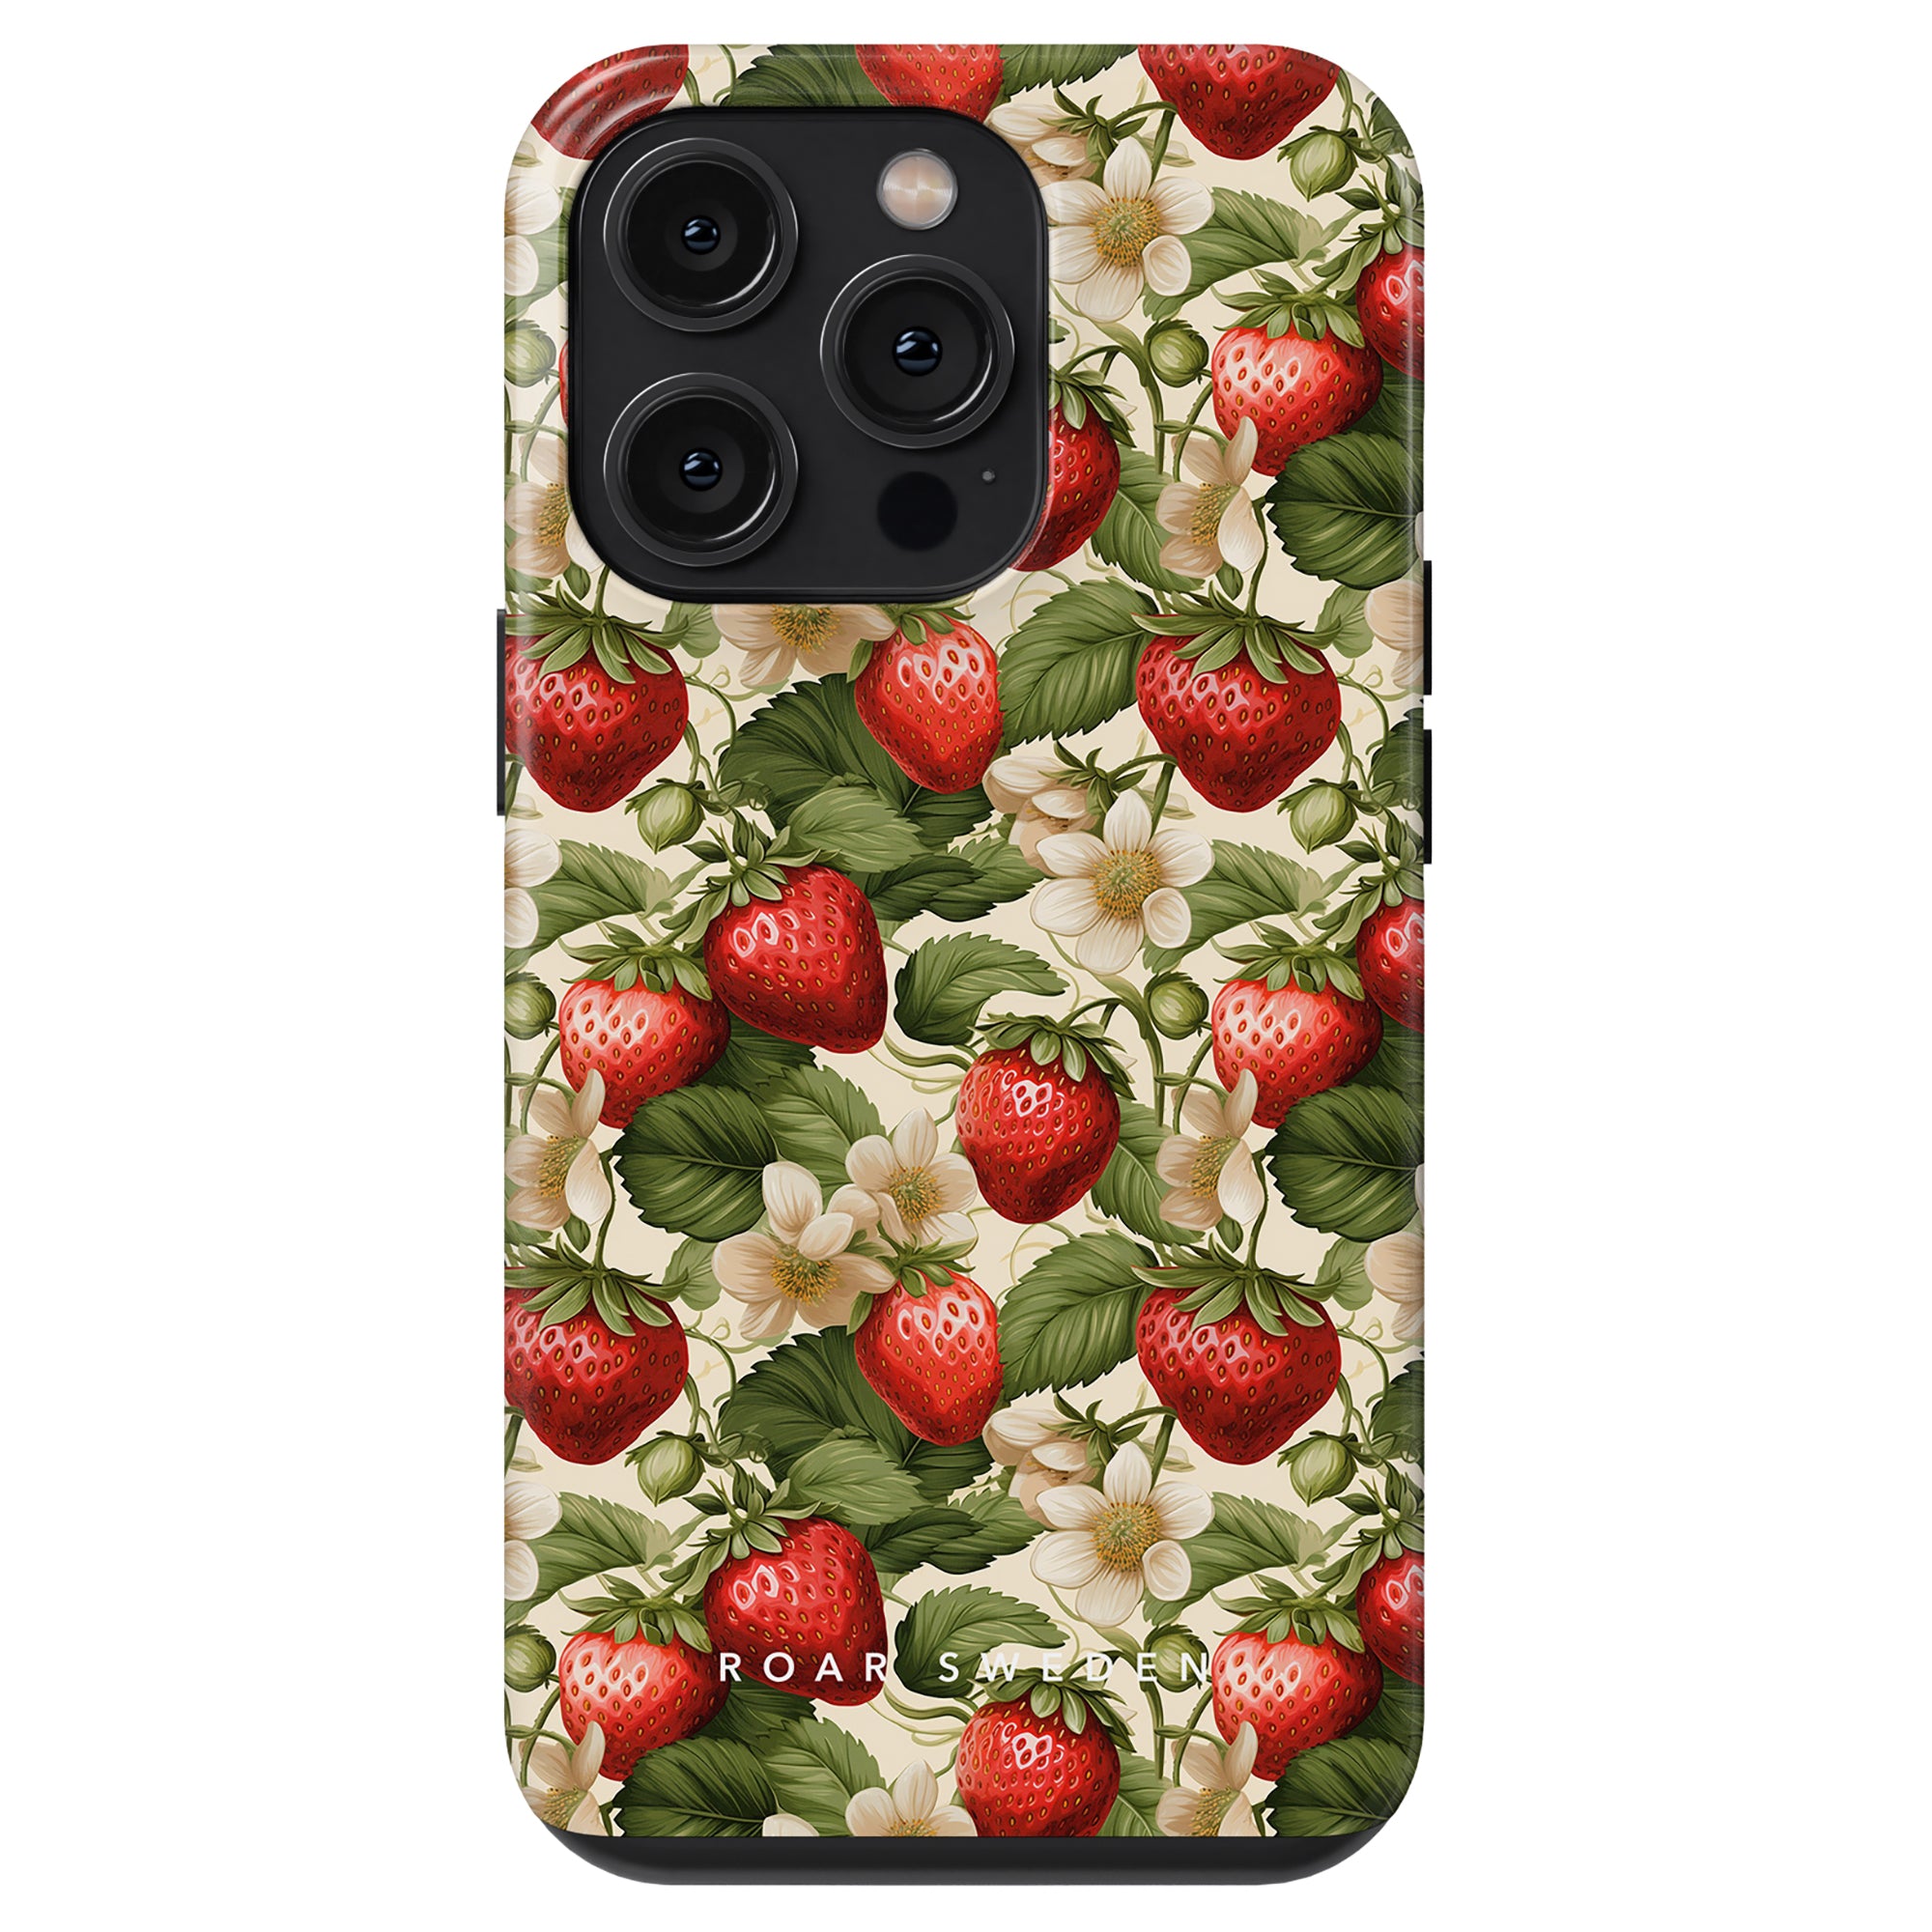 Smartphone Strawberries - Tough Case with strawberry and flower pattern design, featuring camera cutouts.